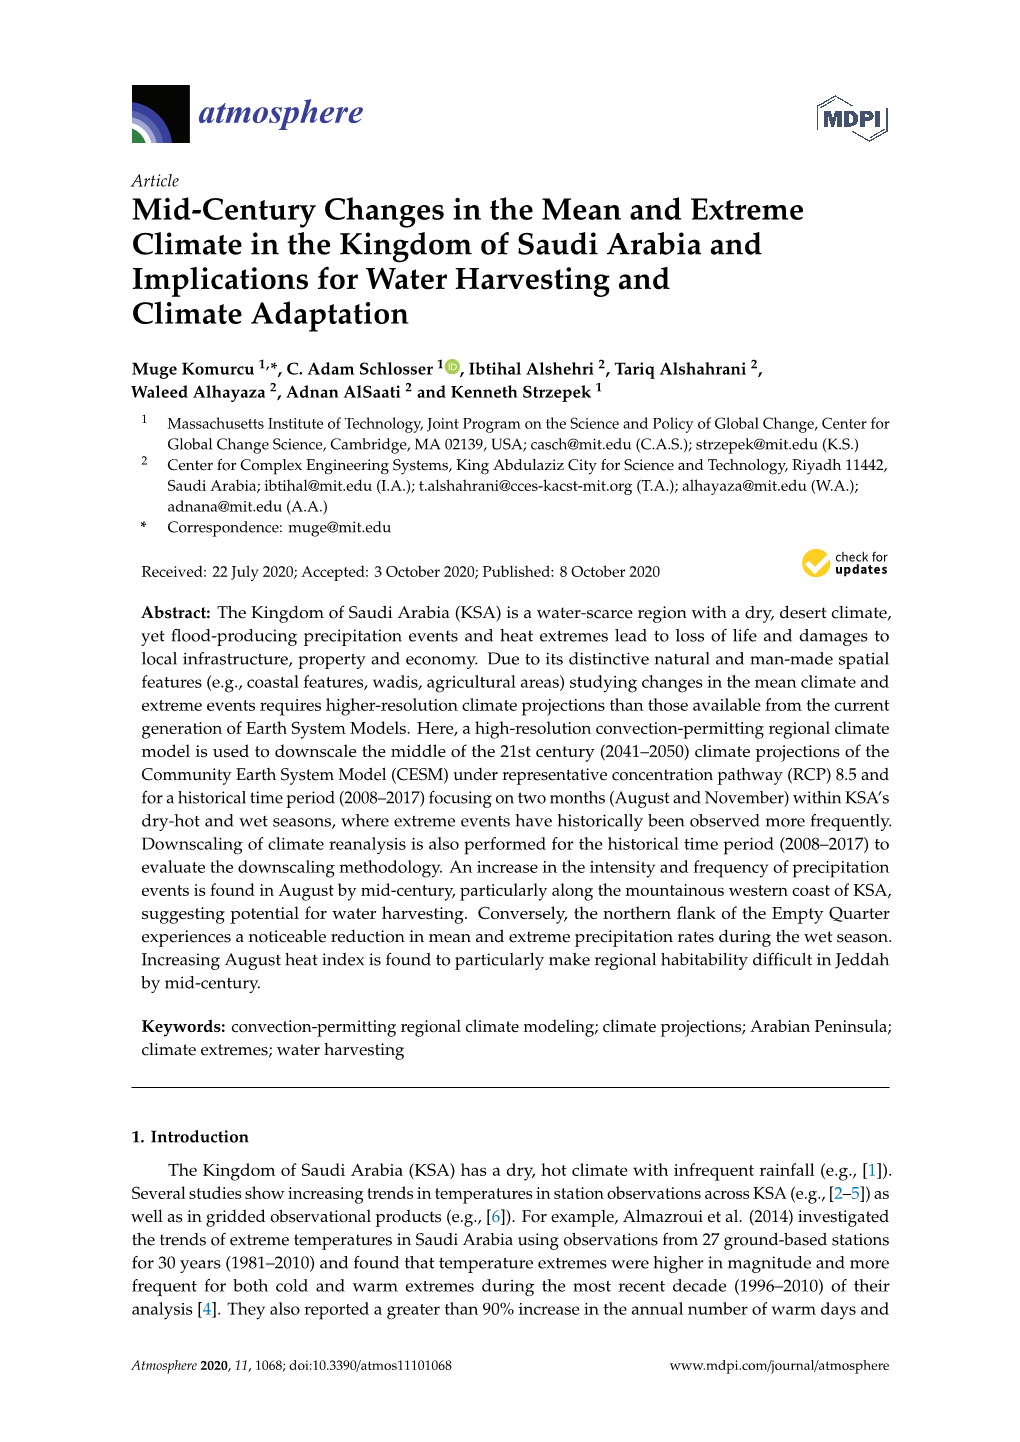 Mid-Century Changes in the Mean and Extreme Climate in the Kingdom of Saudi Arabia and Implications for Water Harvesting and Climate Adaptation